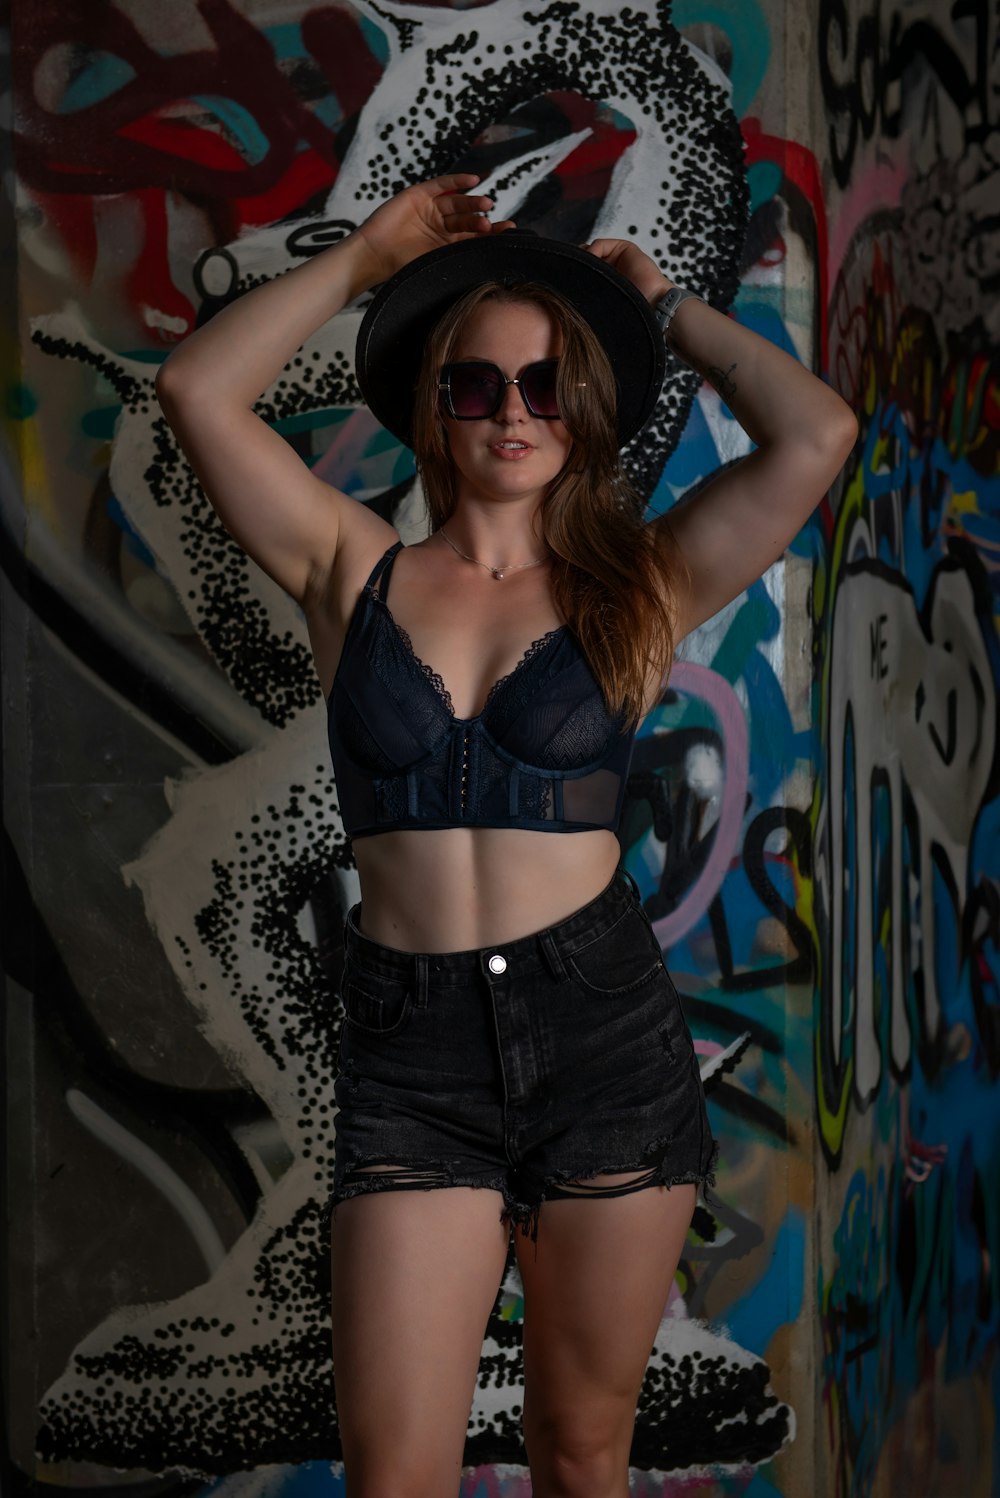 a woman wearing a hat and sunglasses posing in front of a wall with graffiti